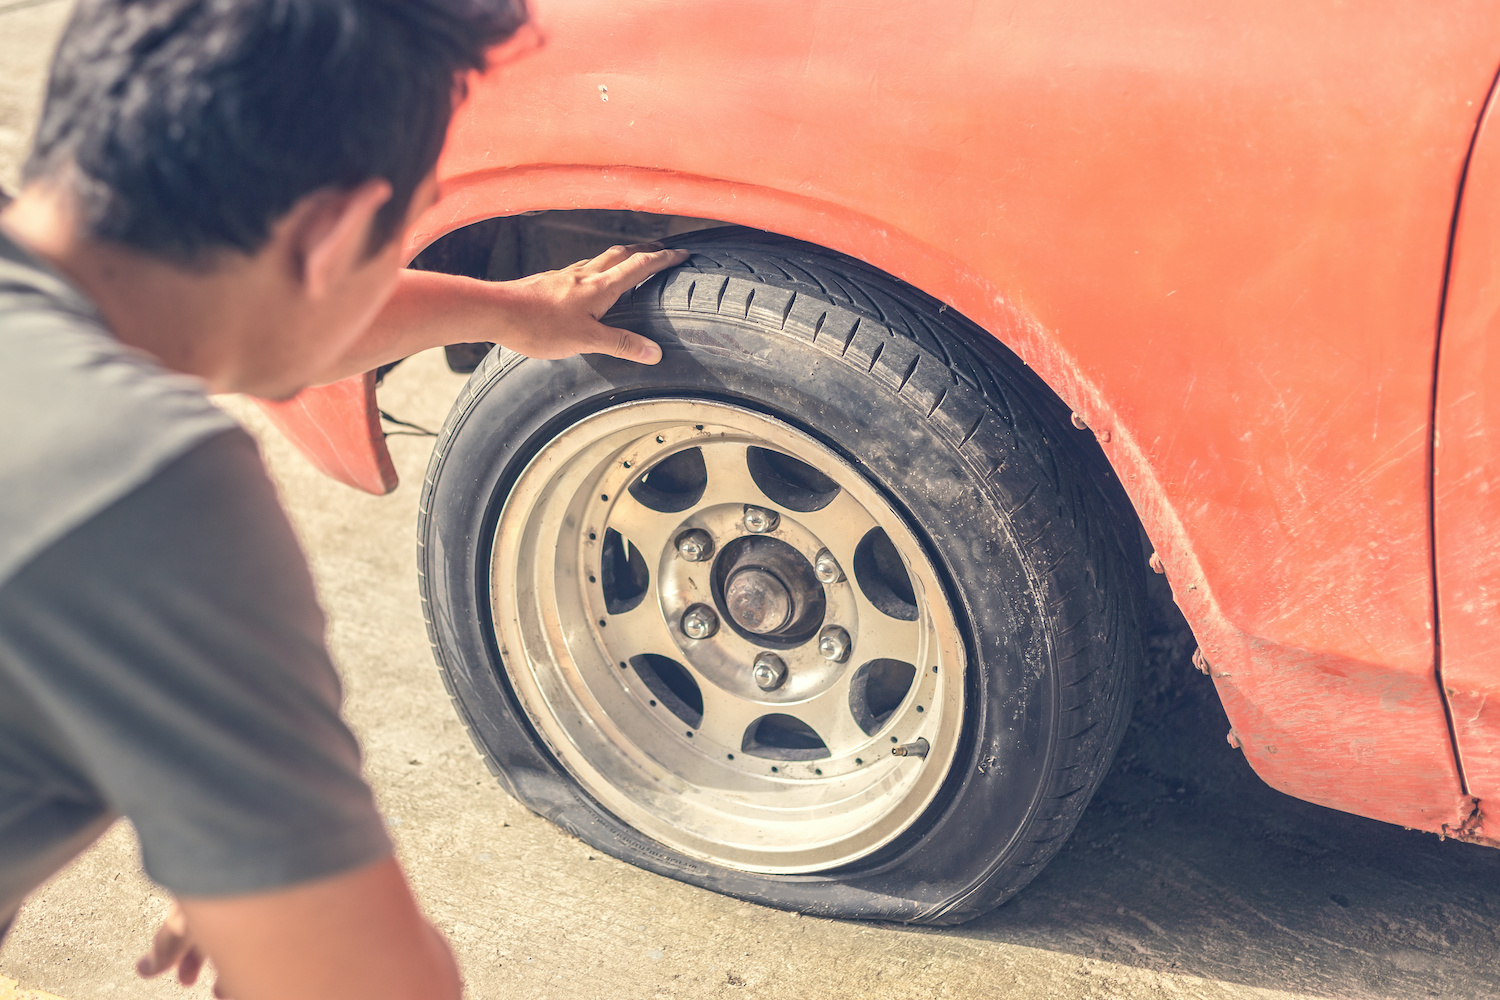 What Can I Do to Prevent a Flat Tire?